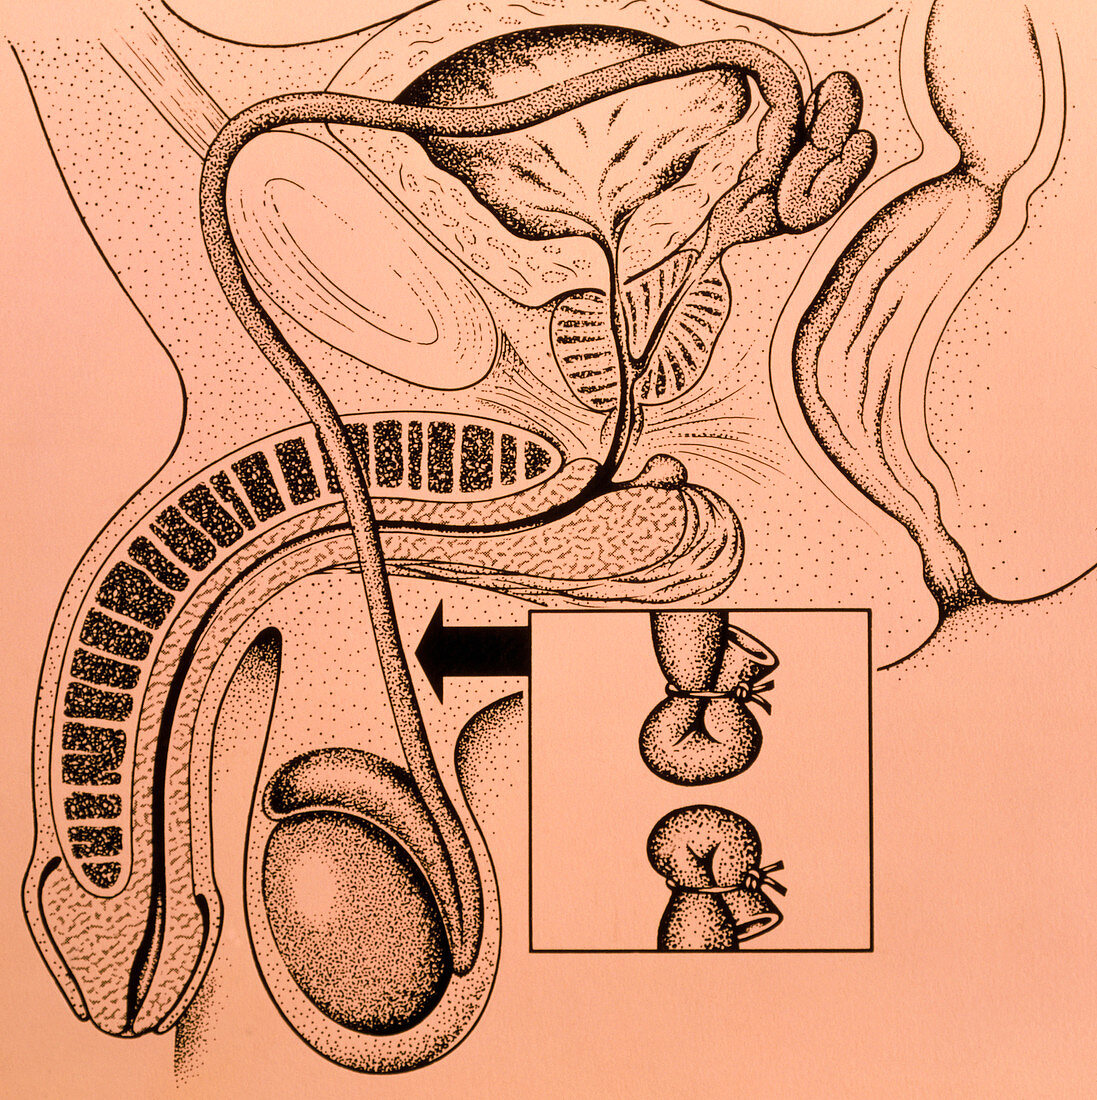 Artwork showing a vasectomy operation